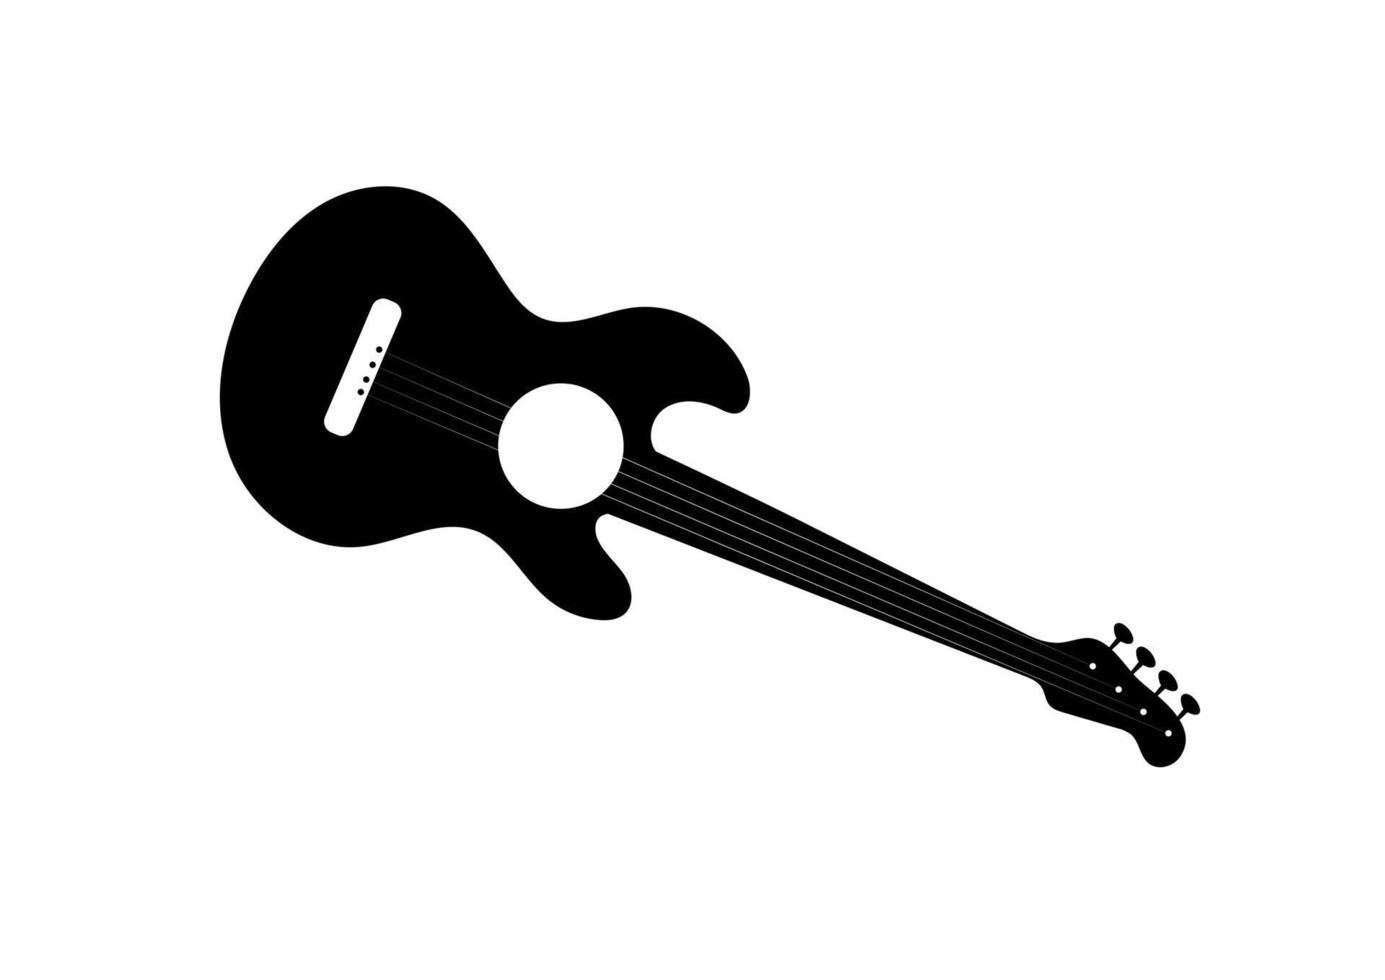 Black and white music guitar icon isolated on white background vector